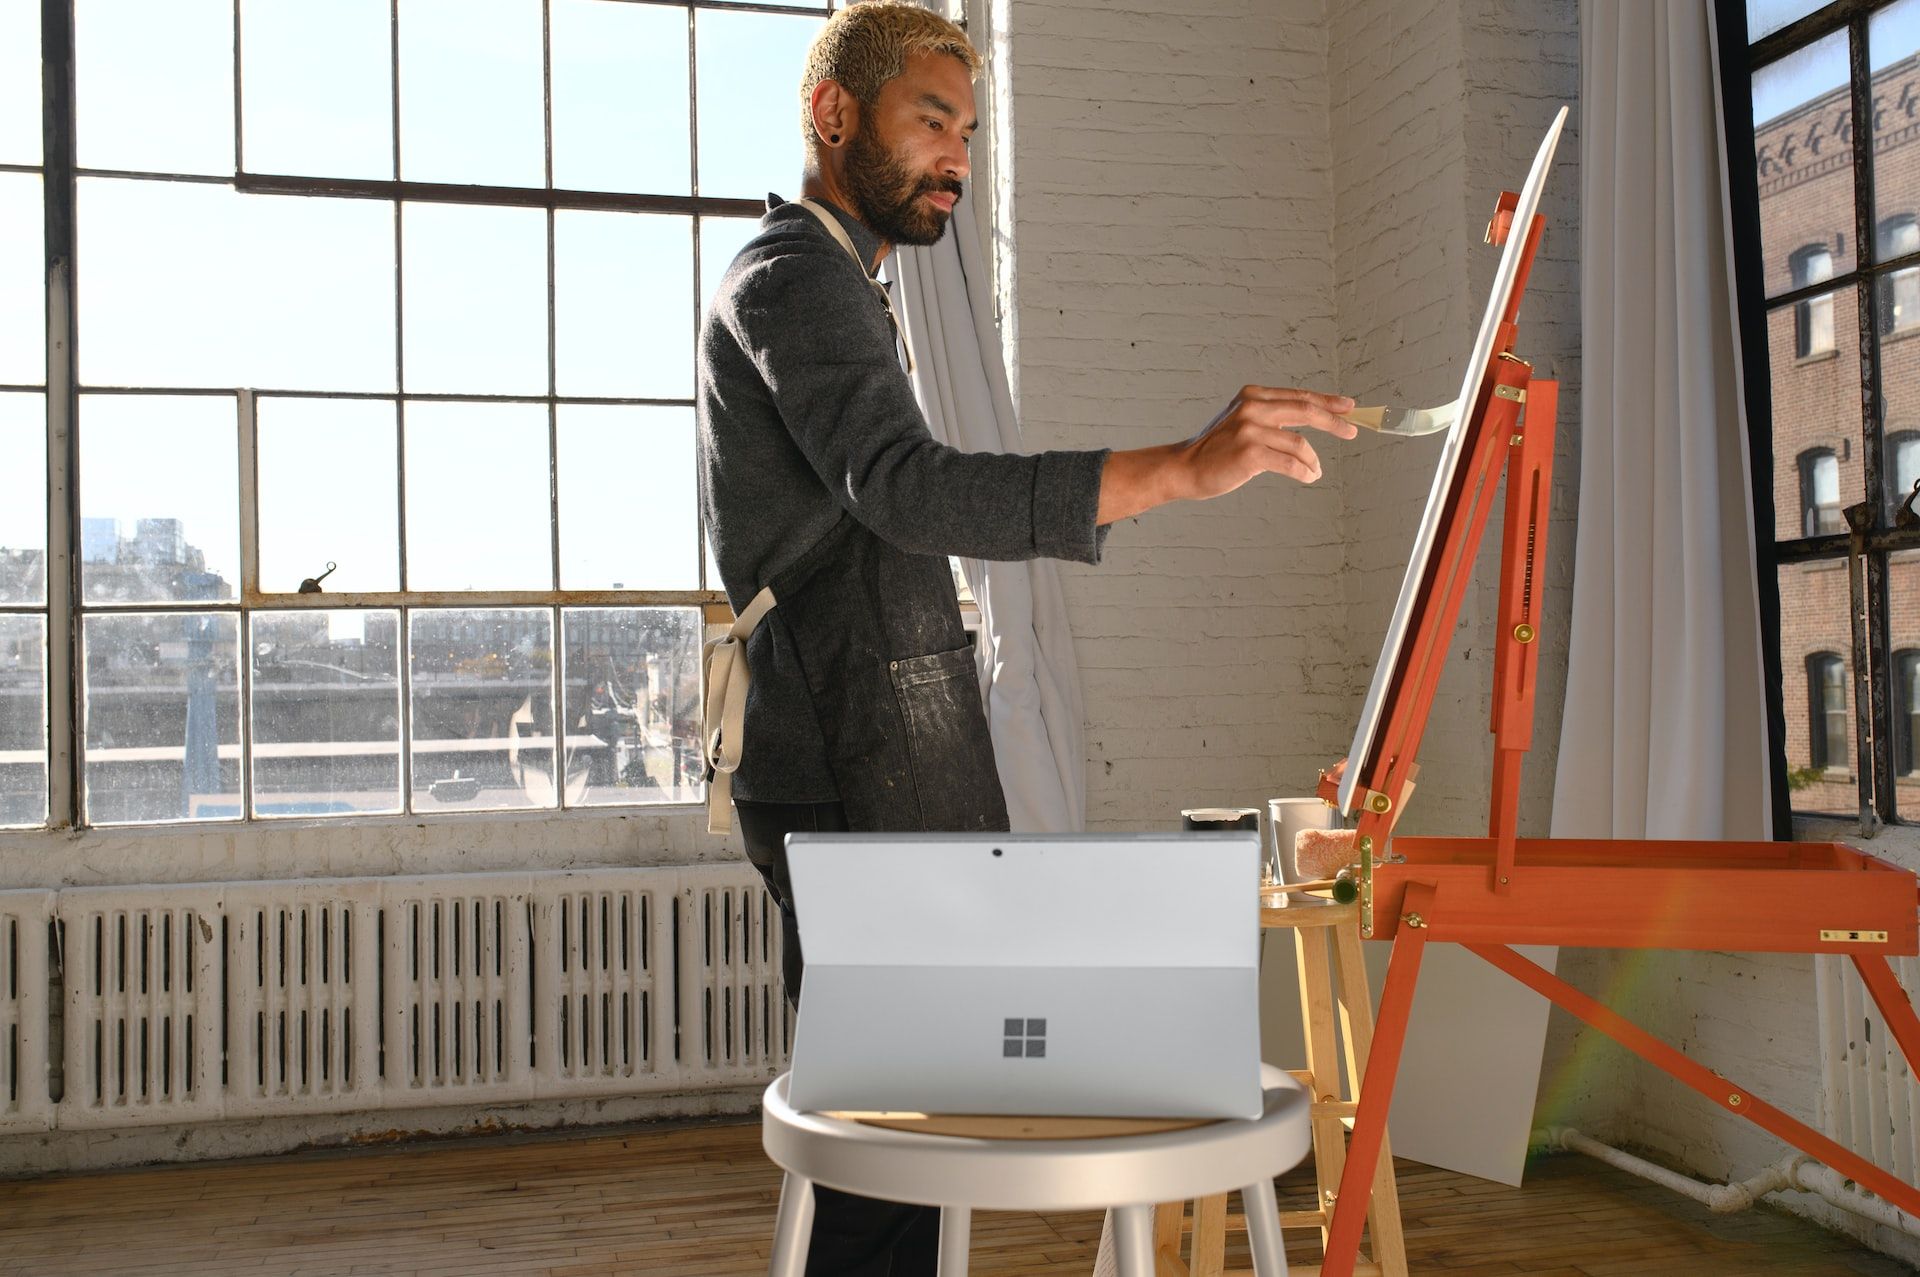 A picture of an artist painting on an easel with a Surface laptop next to them